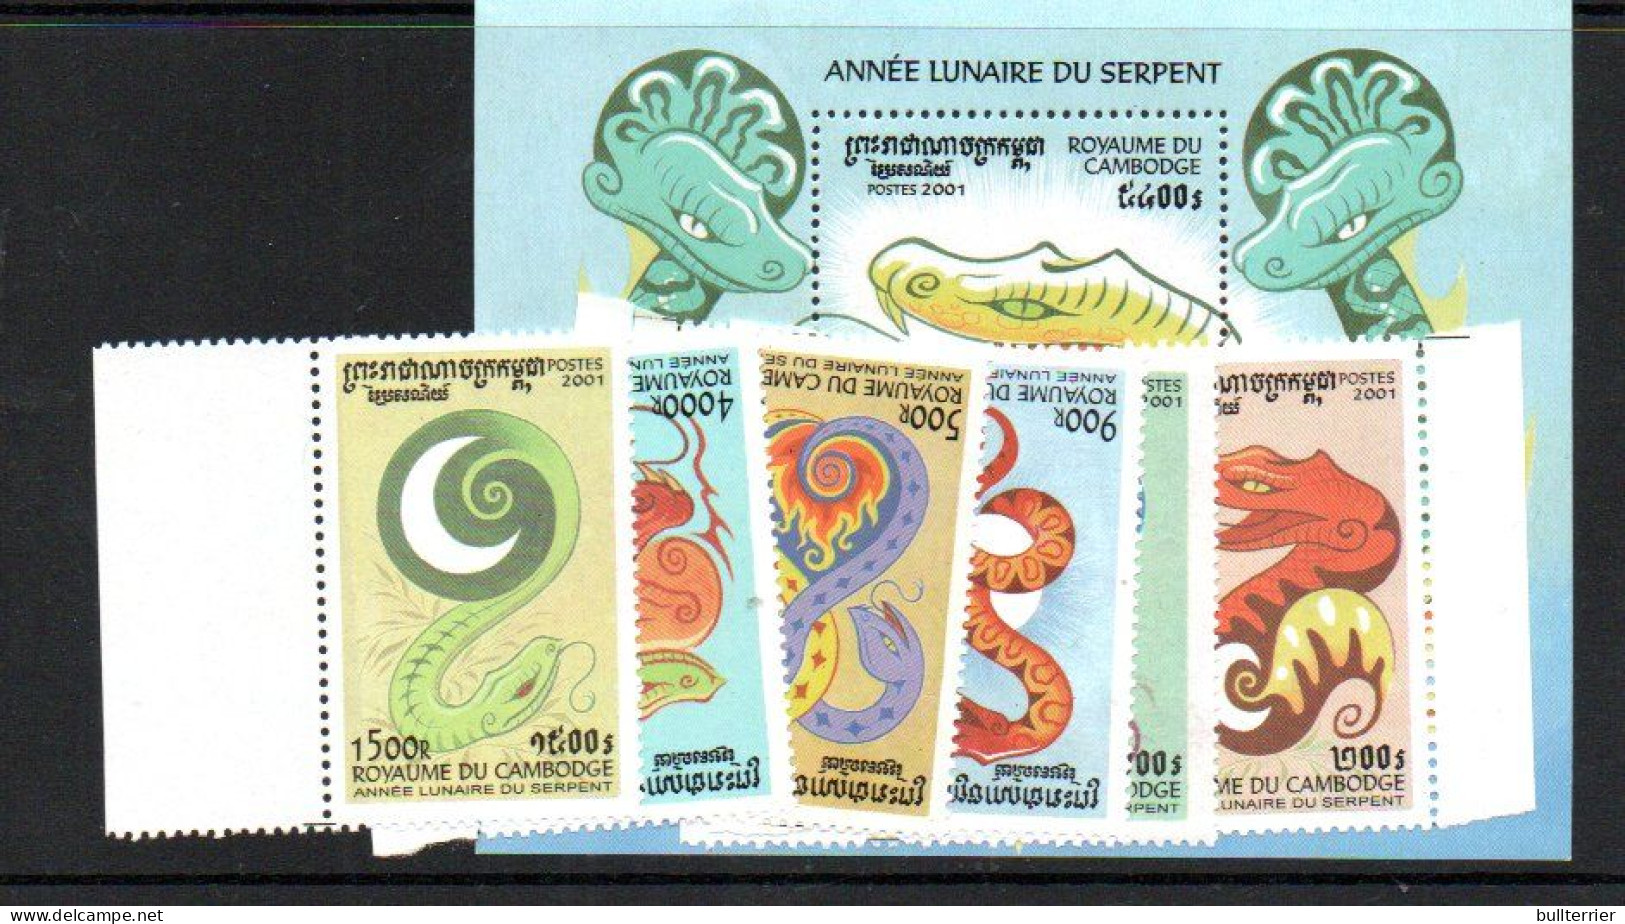 CAMBODIA - 2001- YEAR OF THE SNAKE SET OF  6 + SOUVENIR SHEET  MINT NEVER HINGED SG CAT £14.10 - Cambodja